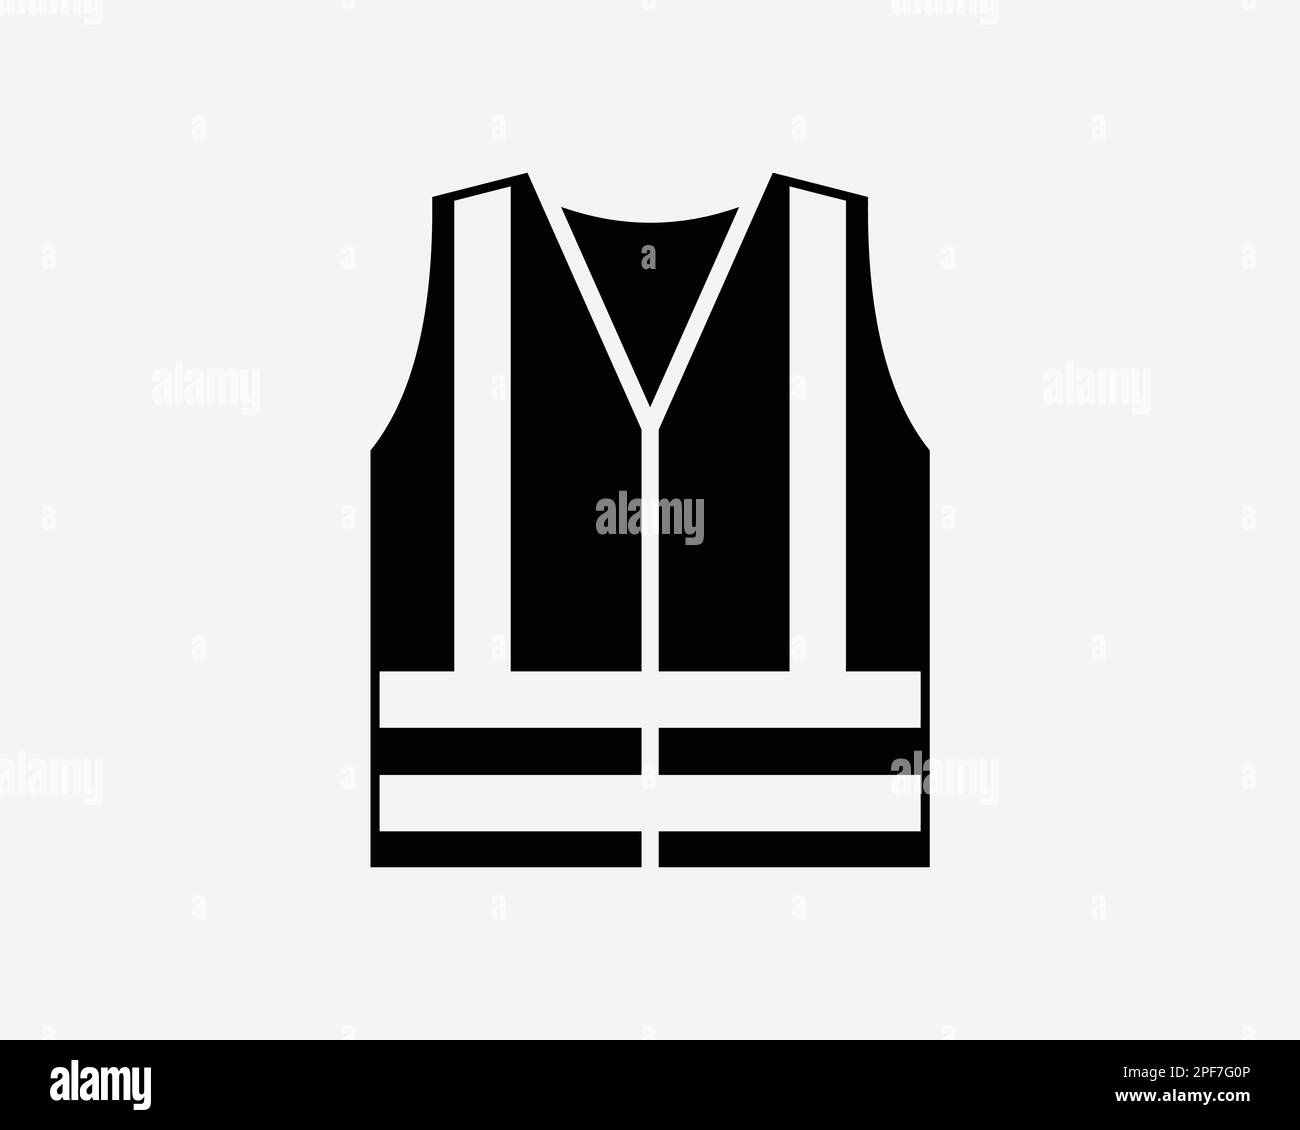 Safety Vest Icon Construction Protective Clothing Jacket Black White Silhouette Symbol Icon Sign Graphic Clipart Artwork Illustration Pictogram Vector Stock Vector